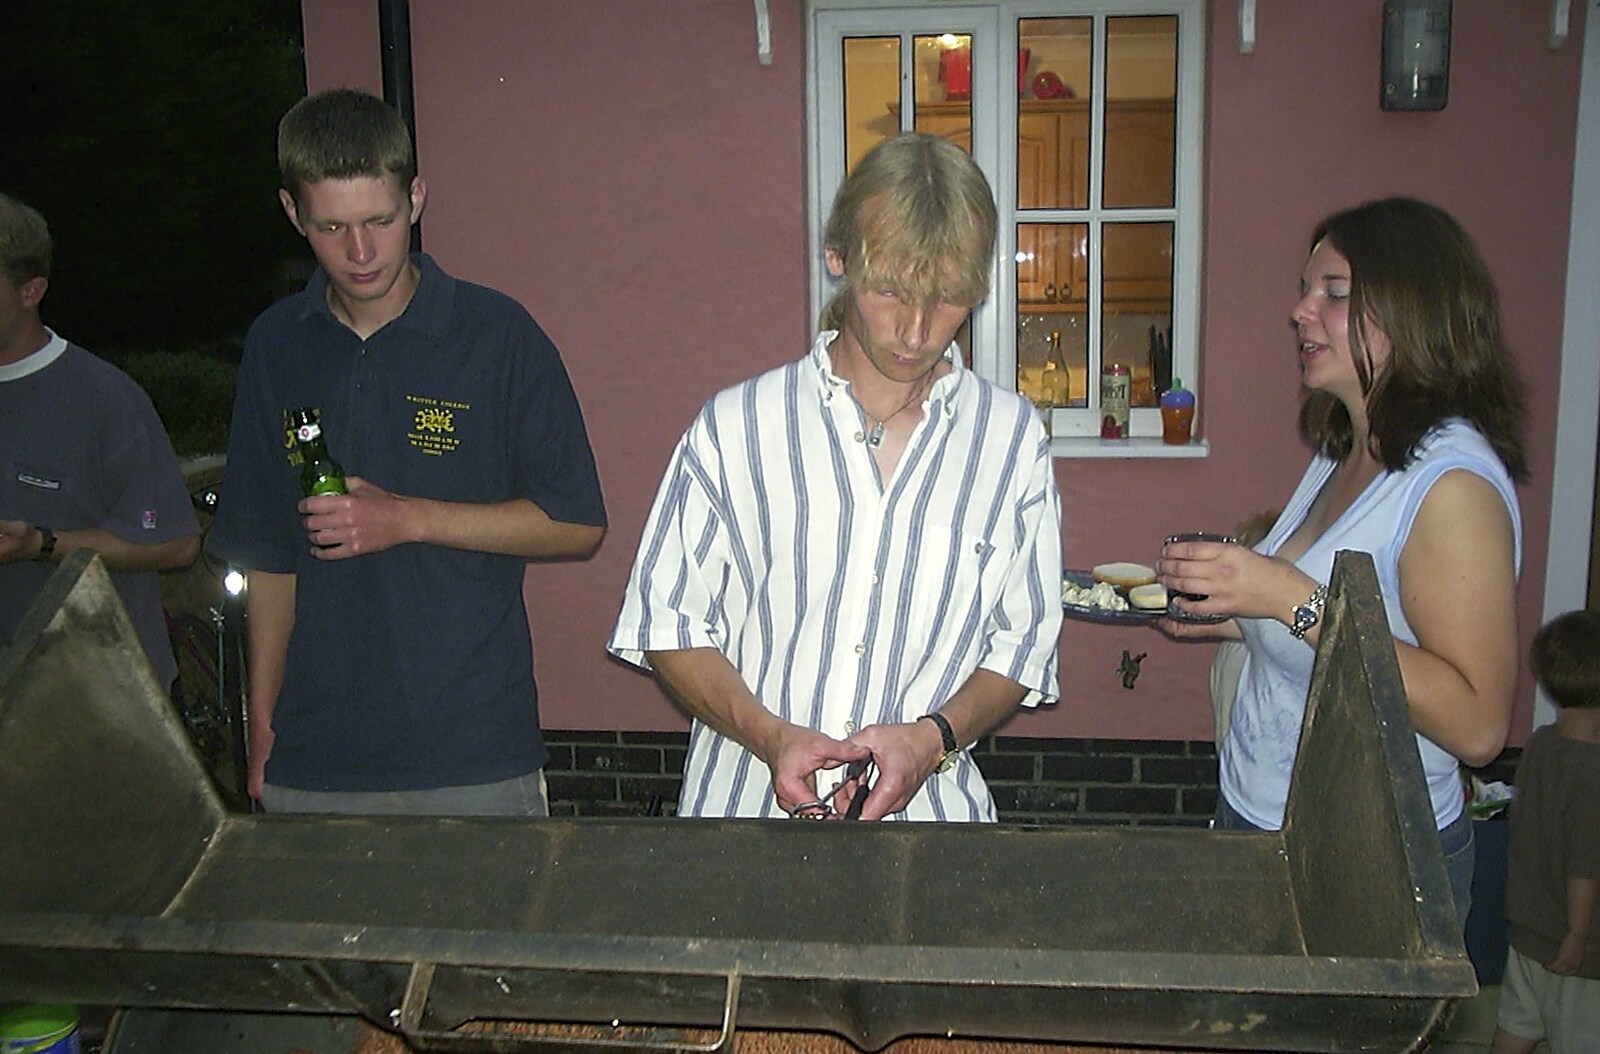 The BSCC in Debenham, and Bill's Housewarming Barbie, Yaxley, Suffolk - 31st July 2004: Jimmy pokes the barbeque